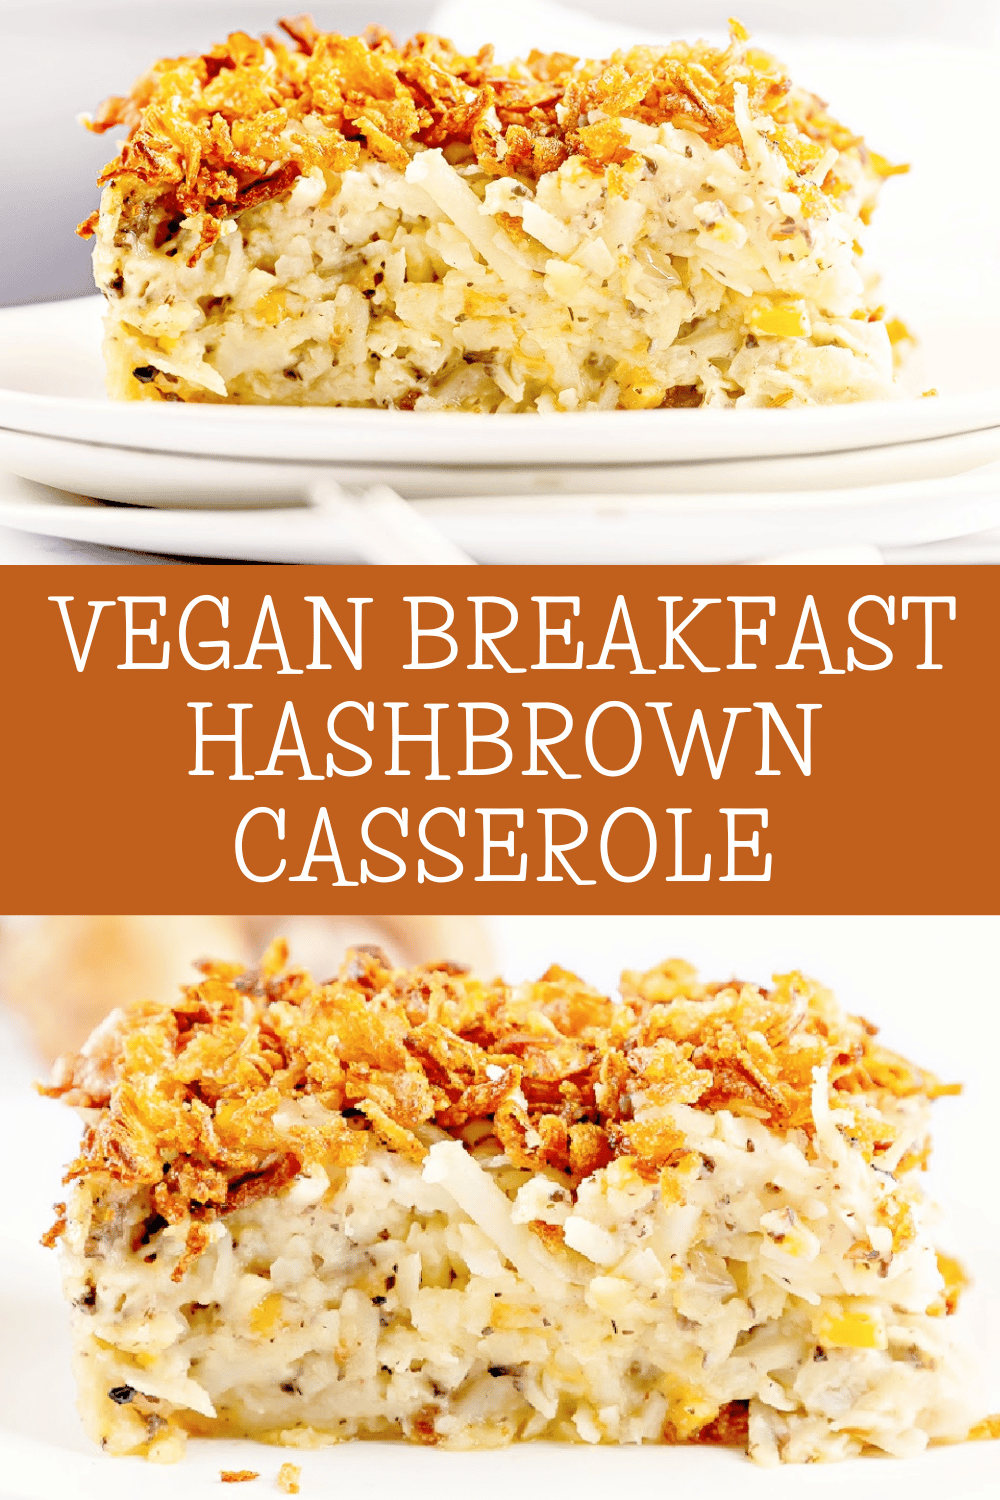 Hash Brown Casserole ~ This easy to make, classic breakfast casserole is dairy-free, contains no canned soup, and is perfect for brunch, holiday breakfasts, baby showers, and more!  Shredded hash brown potatoes are baked in a creamy mixture that includes dairy-free cheeses, sour cream, and fresh mushrooms. All topped off with a layer of fresh and crispy fried onions. via @thiswifecooks